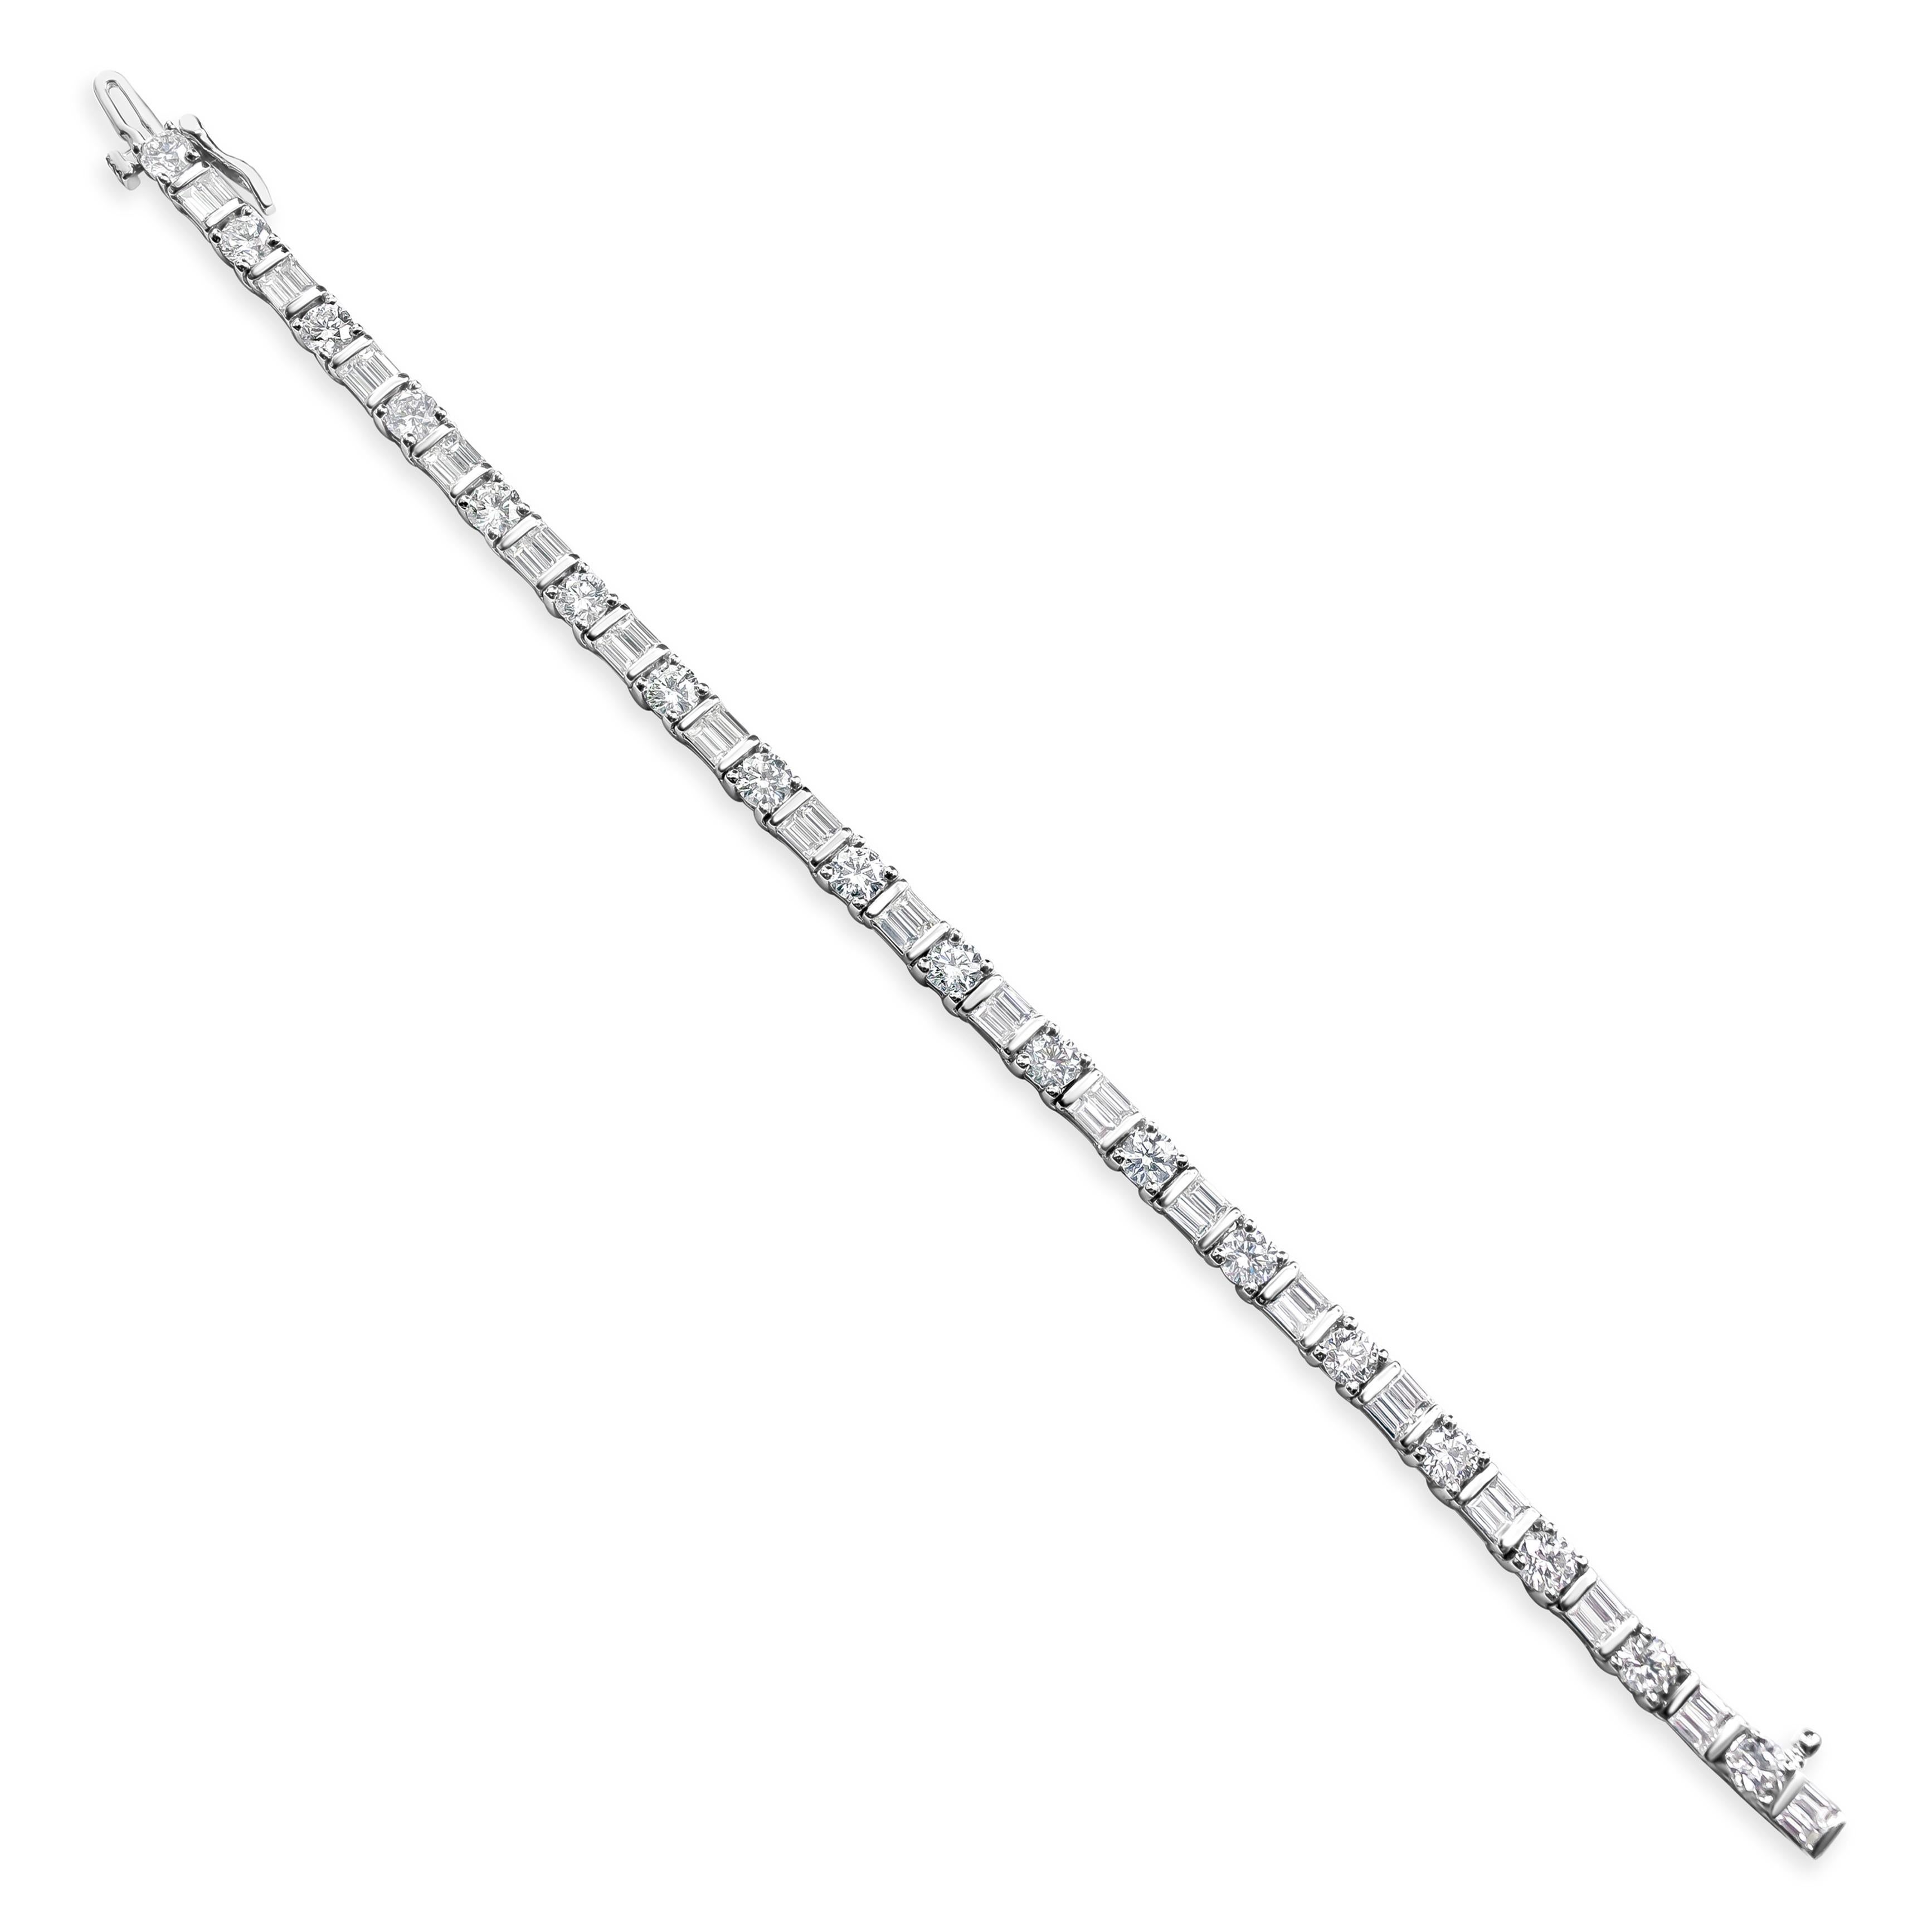 This simple and classic tennis bracelet showcasing 36 baguette cut diamond weighing 3.78 carats total, elegantly alternating with brilliant round cut diamond set in a classic four prong setting weighing 4.24 carats total. Both are G color and VS-SI1